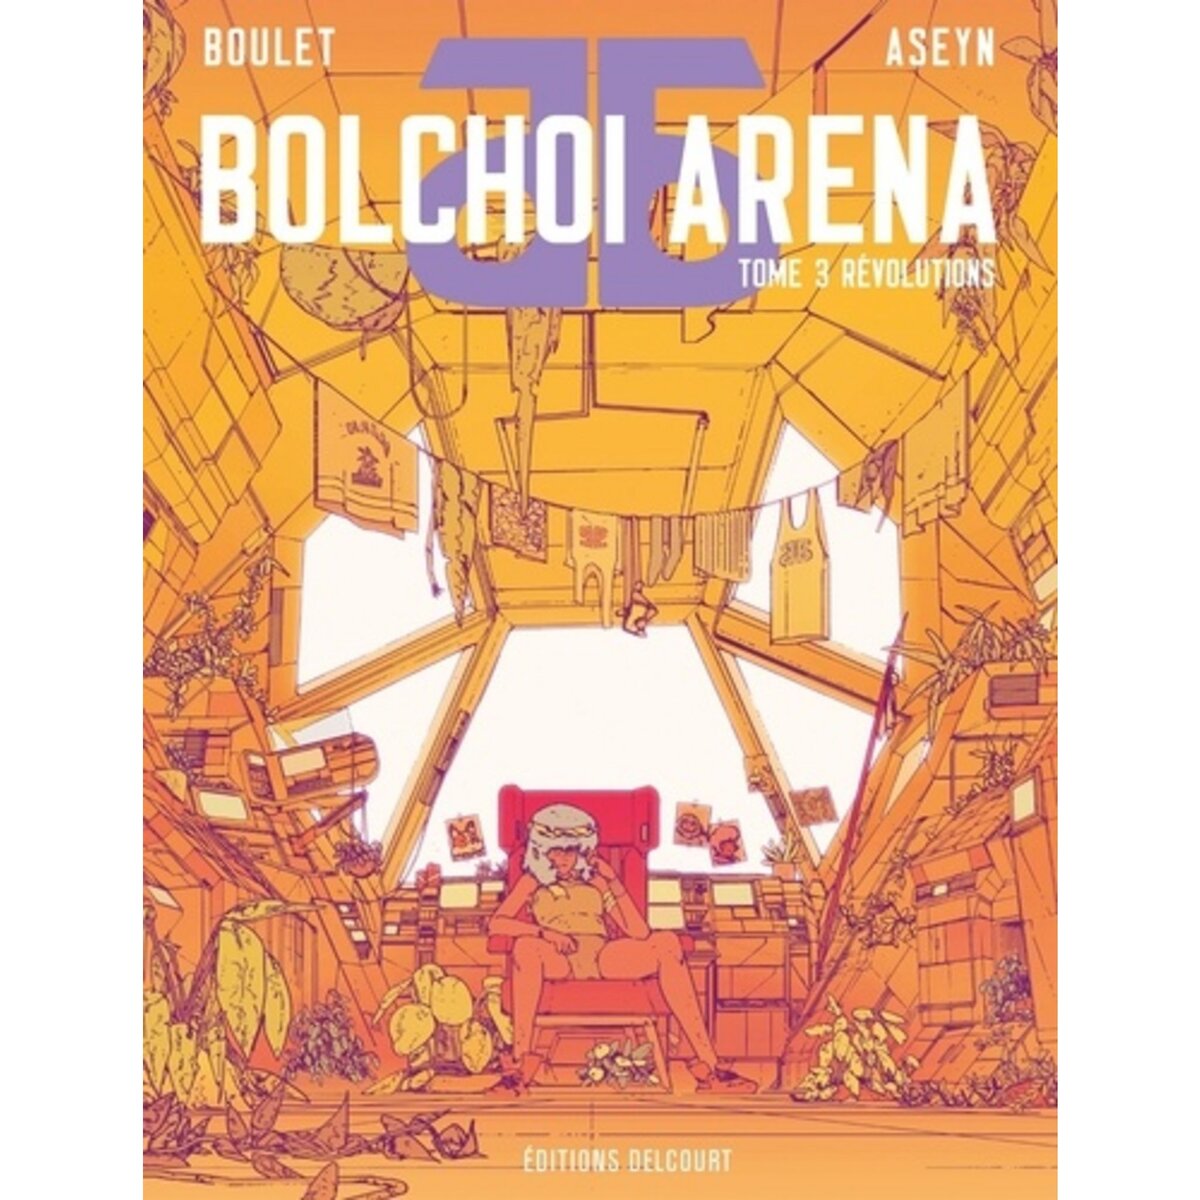  BOLCHOI ARENA TOME 3 : REVOLUTIONS, Aseyn